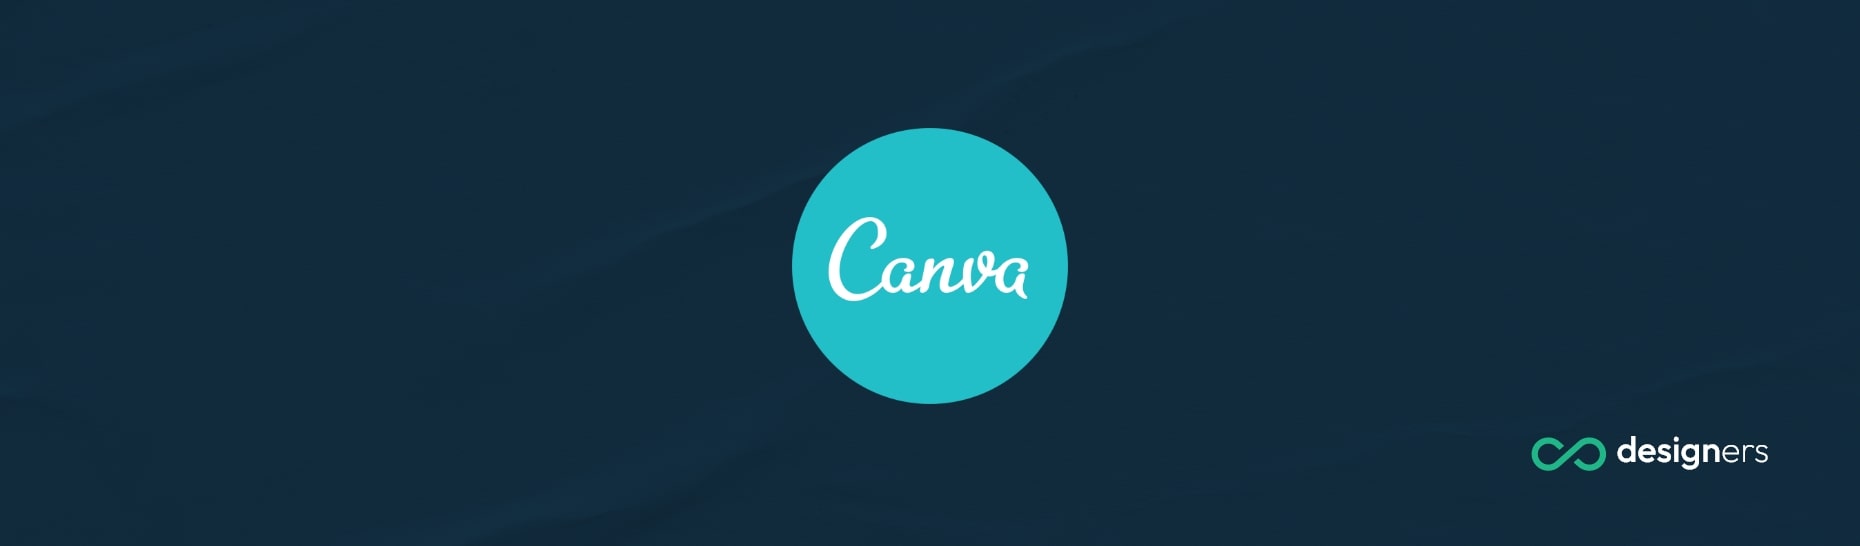 Where I Can Learn Canva for Free?